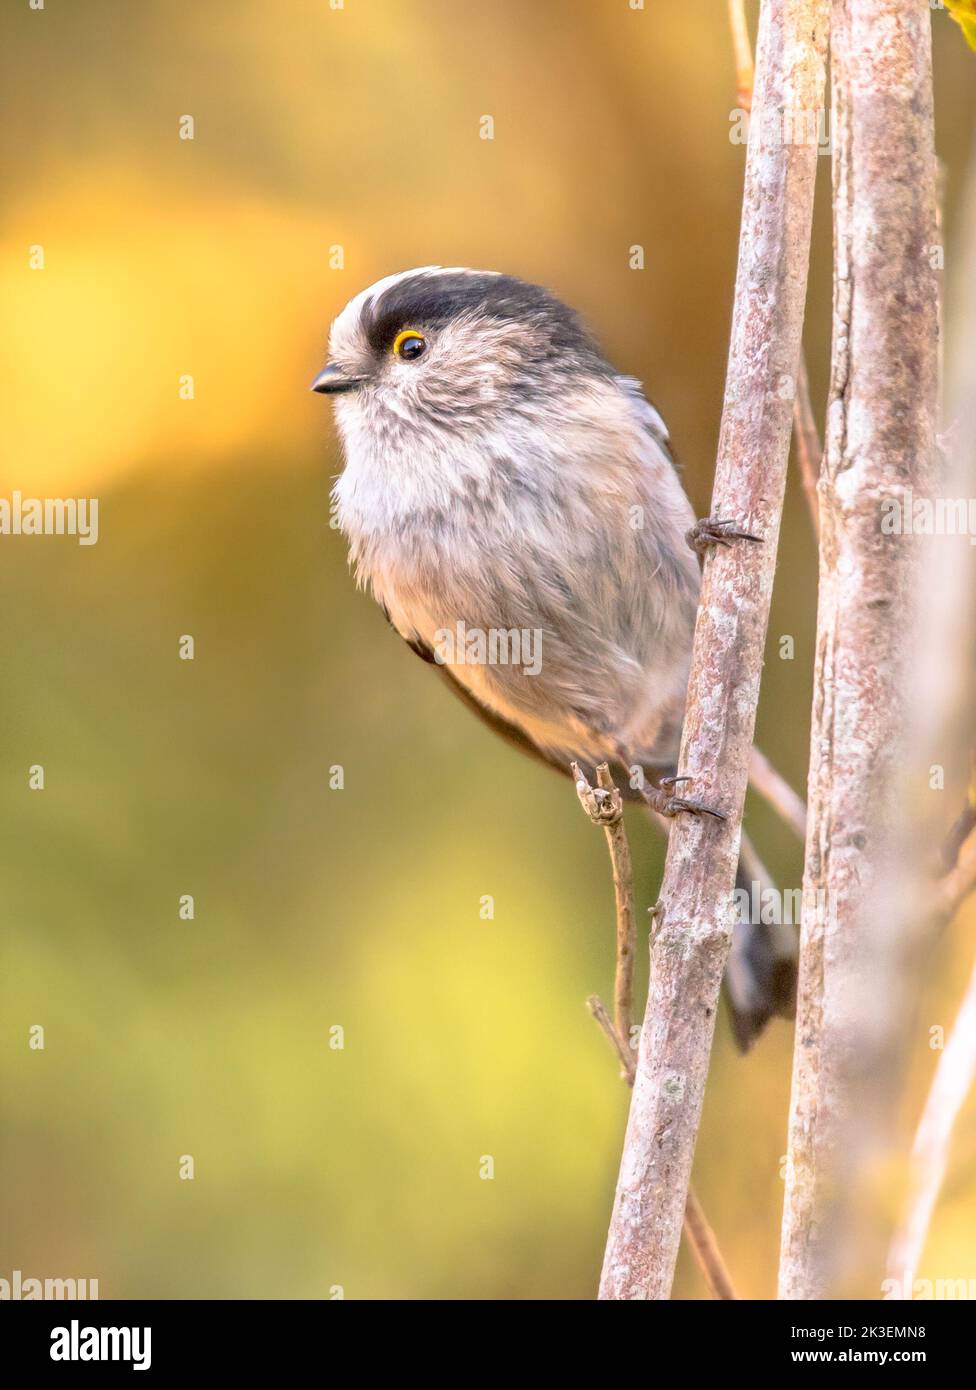 Long-tailed tit (Aegithalos caudatus) looking at camera. The most adorable cute bird of the forest. Wildlife in nature scene. Netherlands Stock Photo